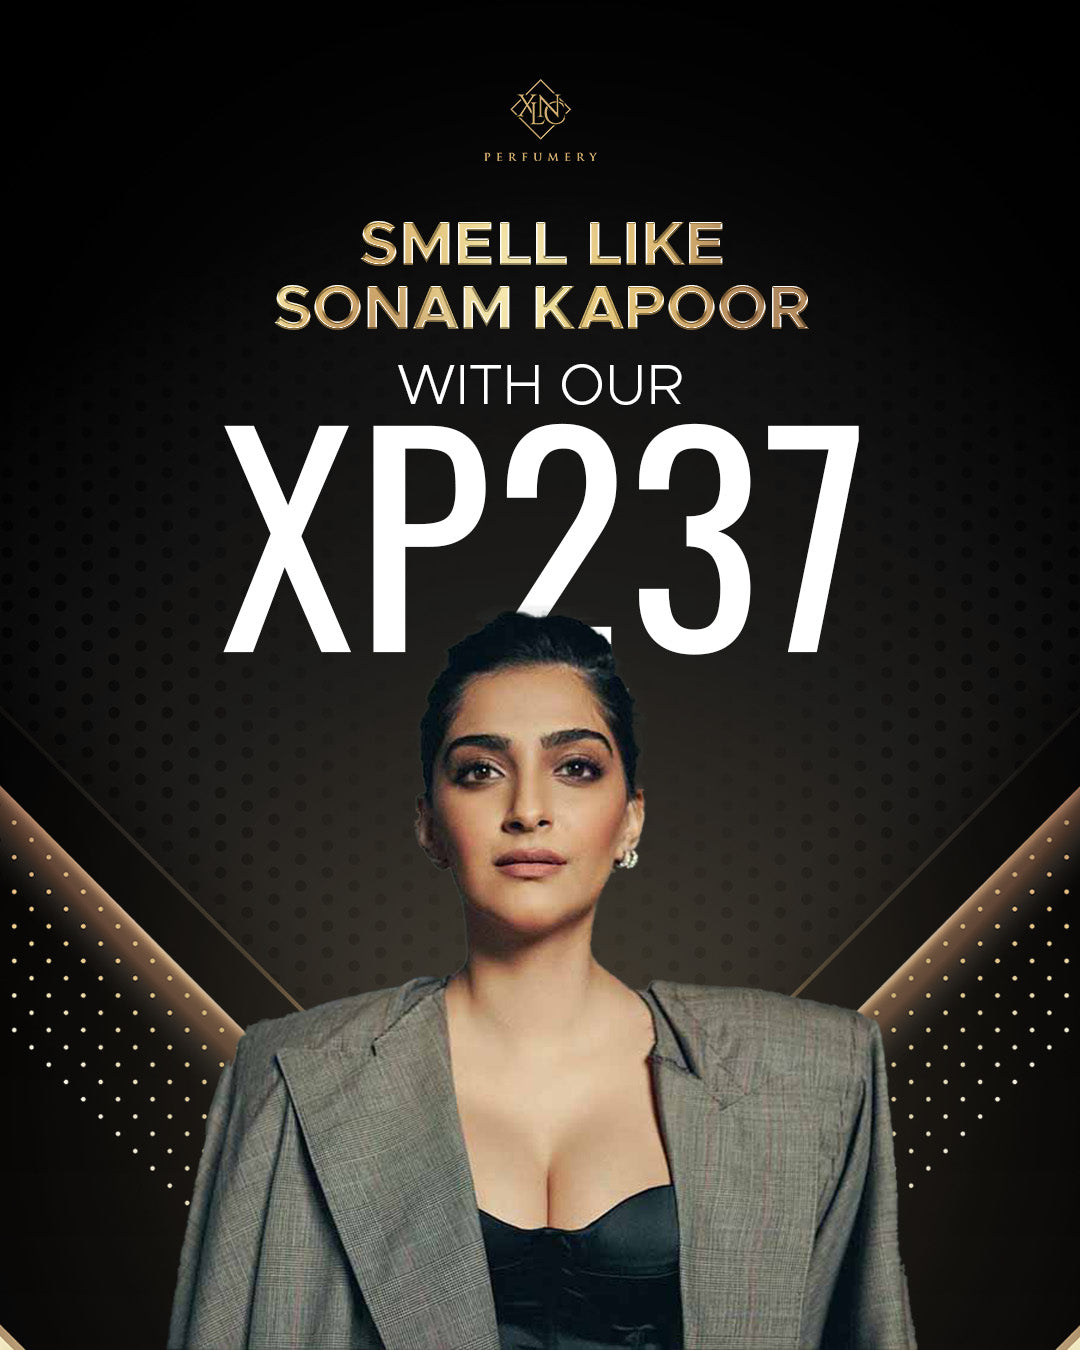 XP237 (Inspired by Byred0 Gypsy Water) Worn by Sonam Kapoor